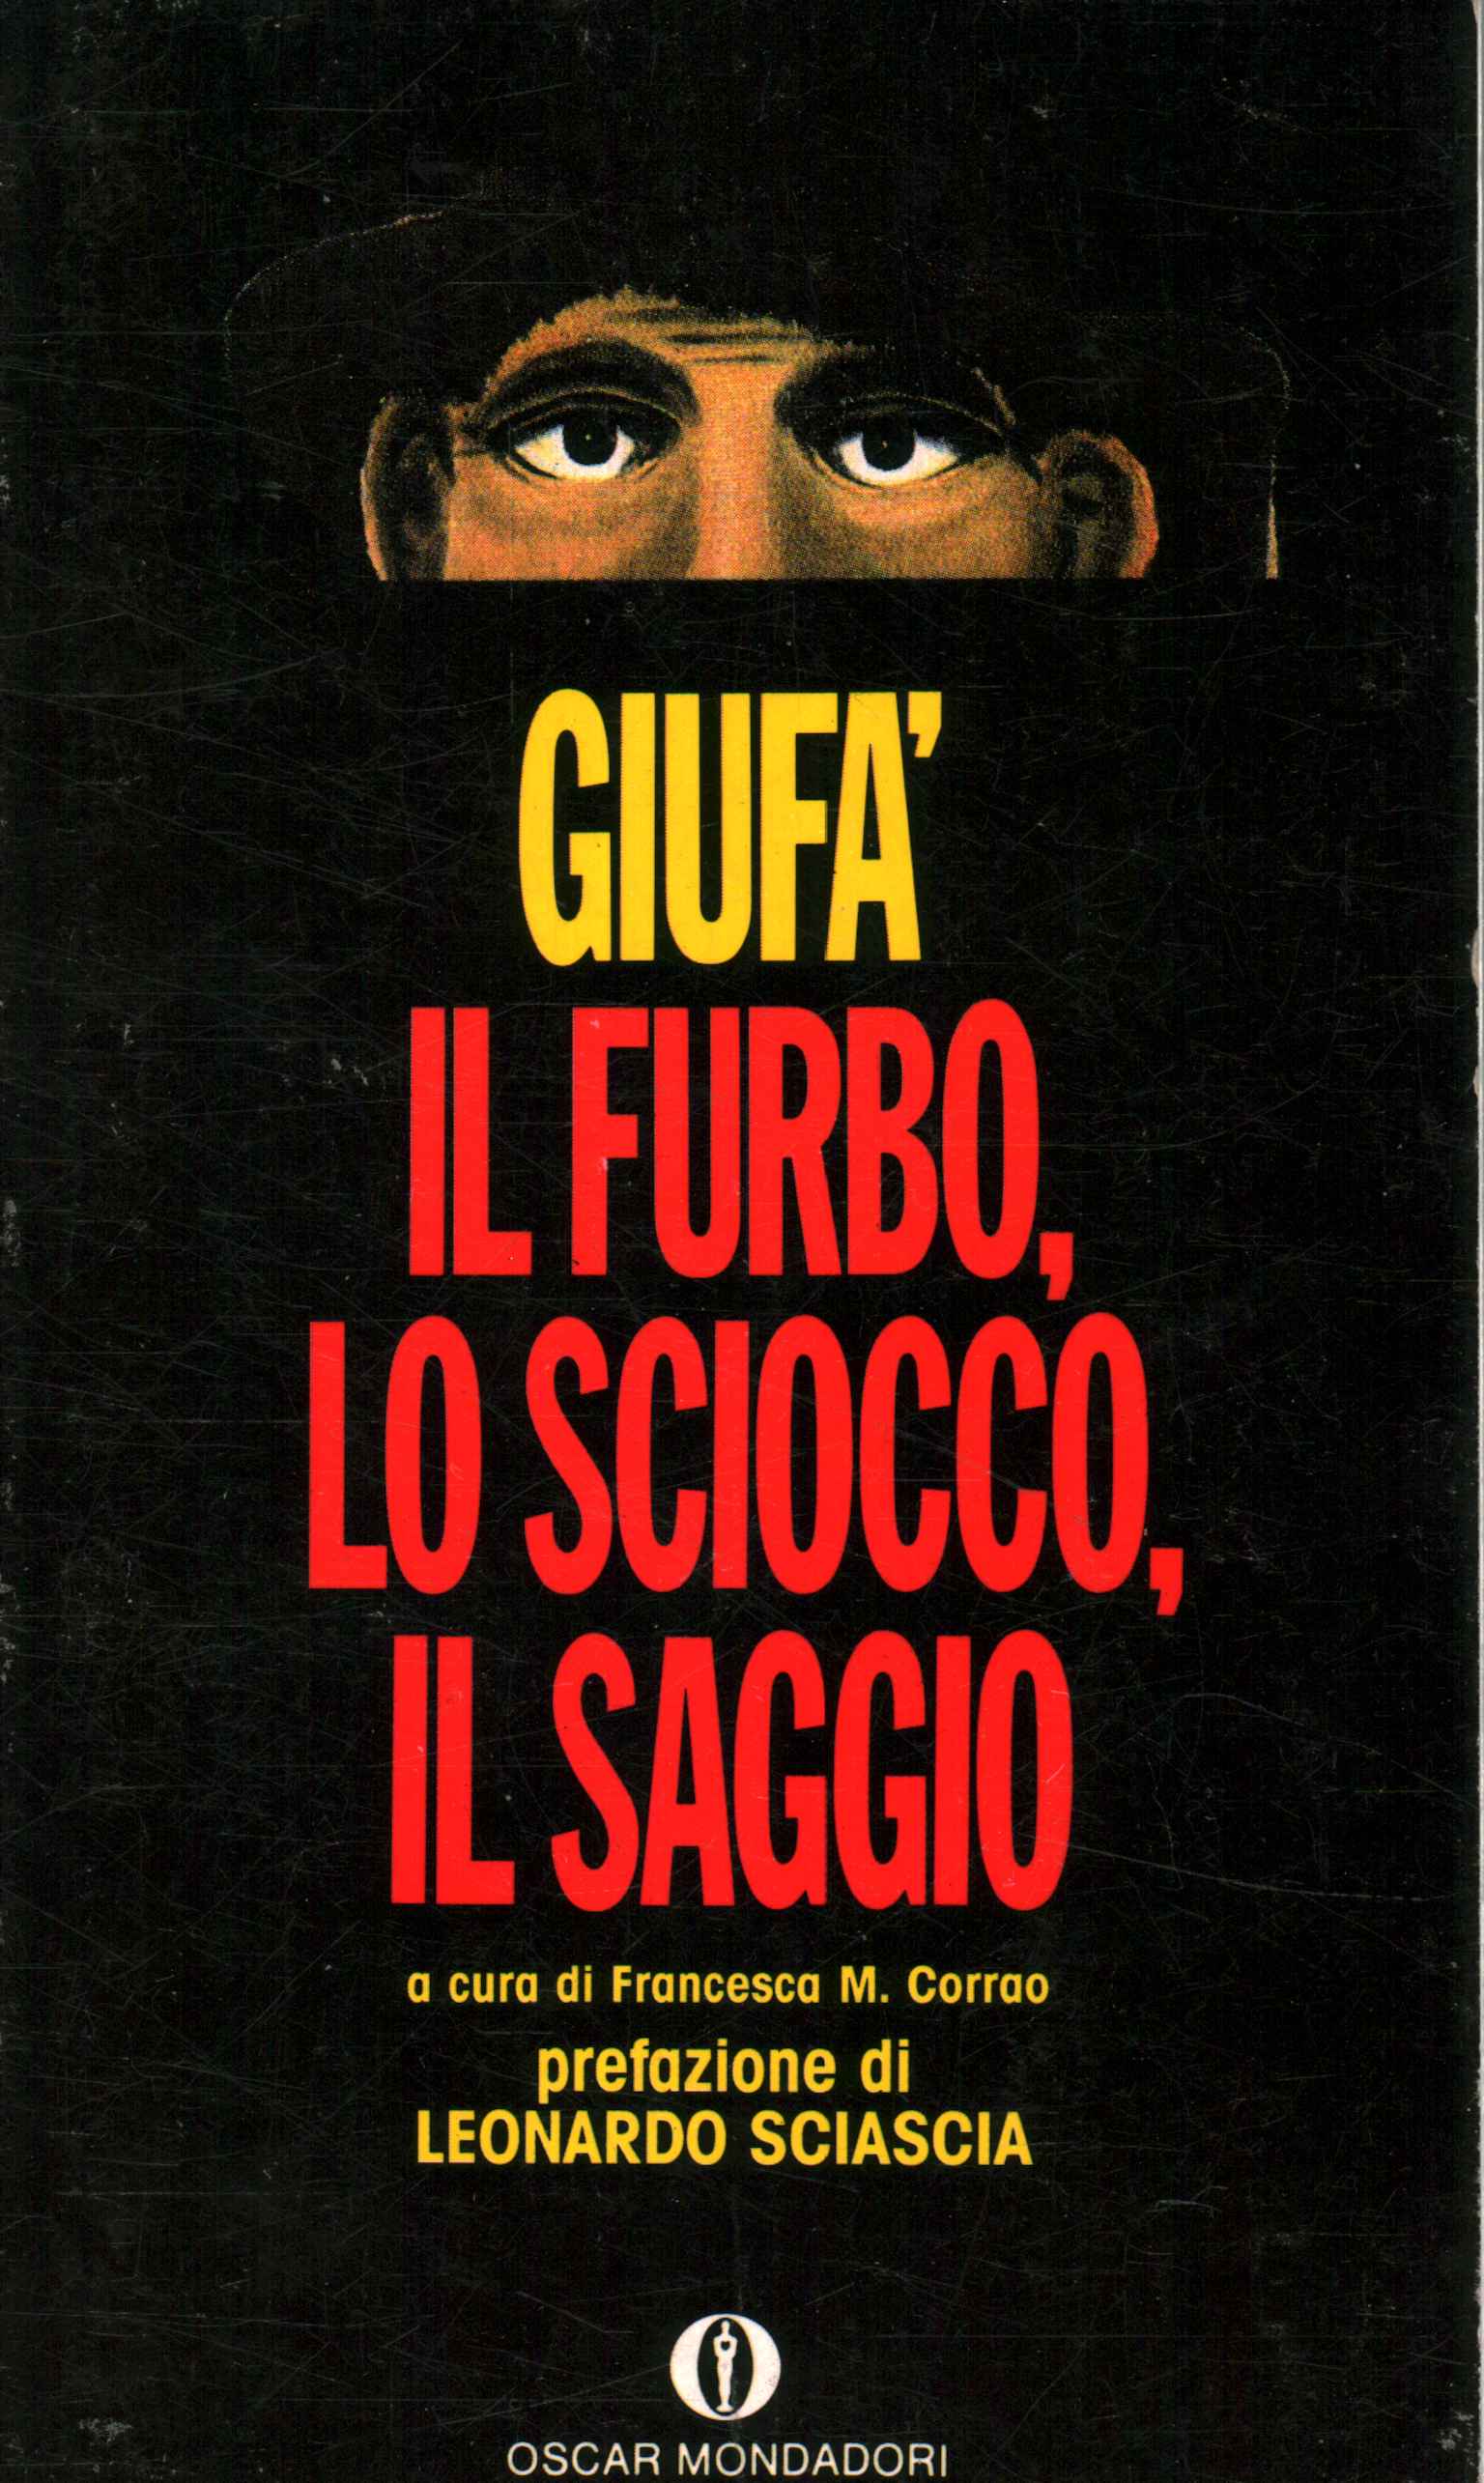 Giufà the smart one the fool, the one knows